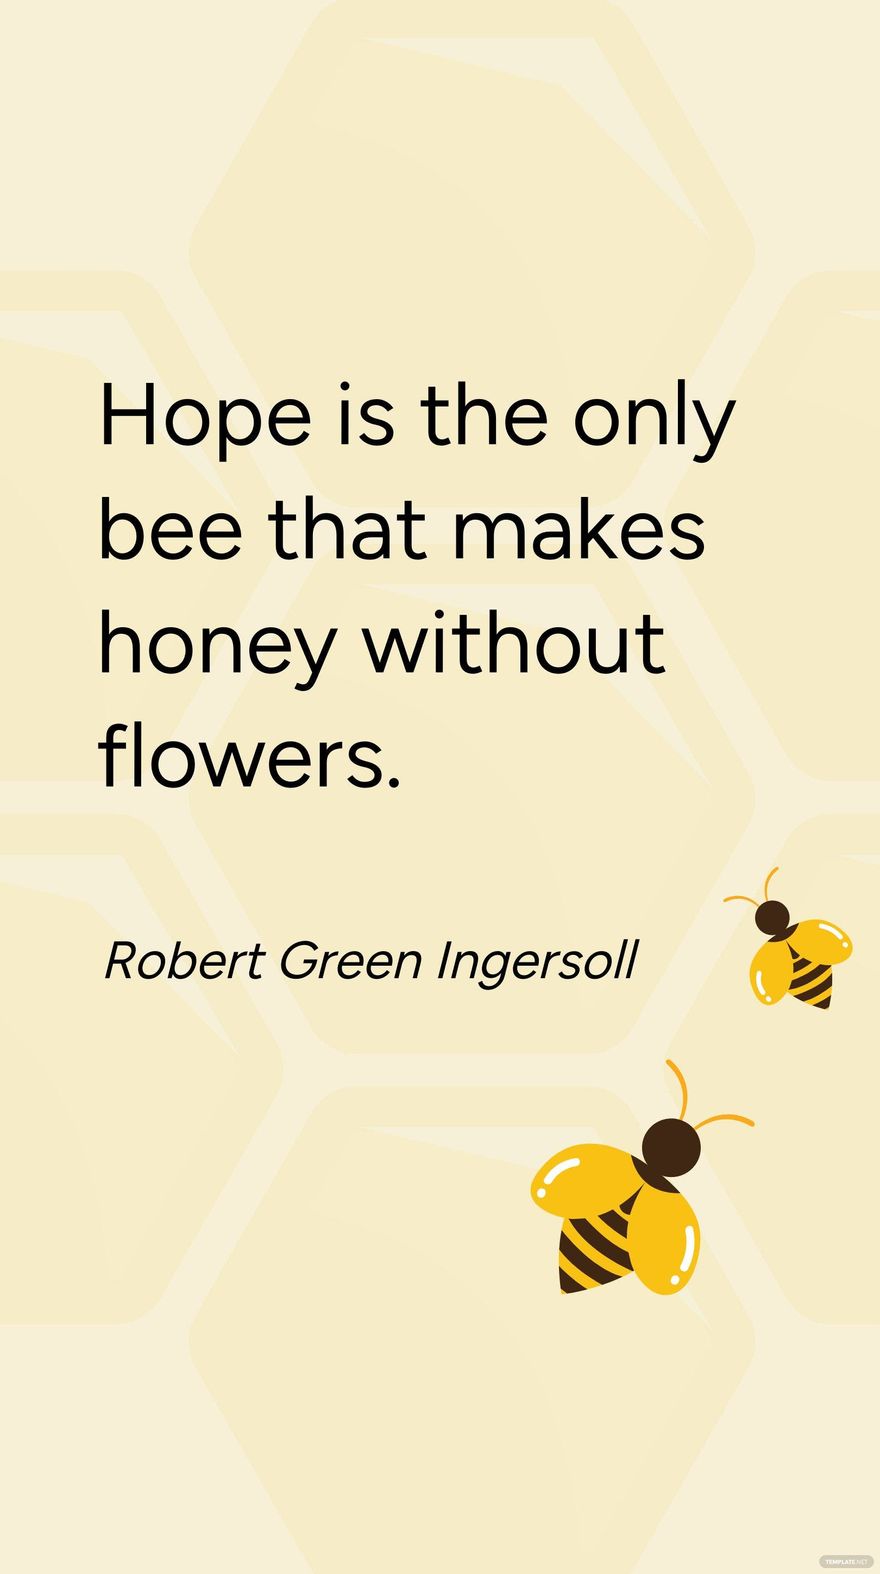 Free Robert Green Ingersoll - Hope is the only bee that makes honey without flowers. in JPG